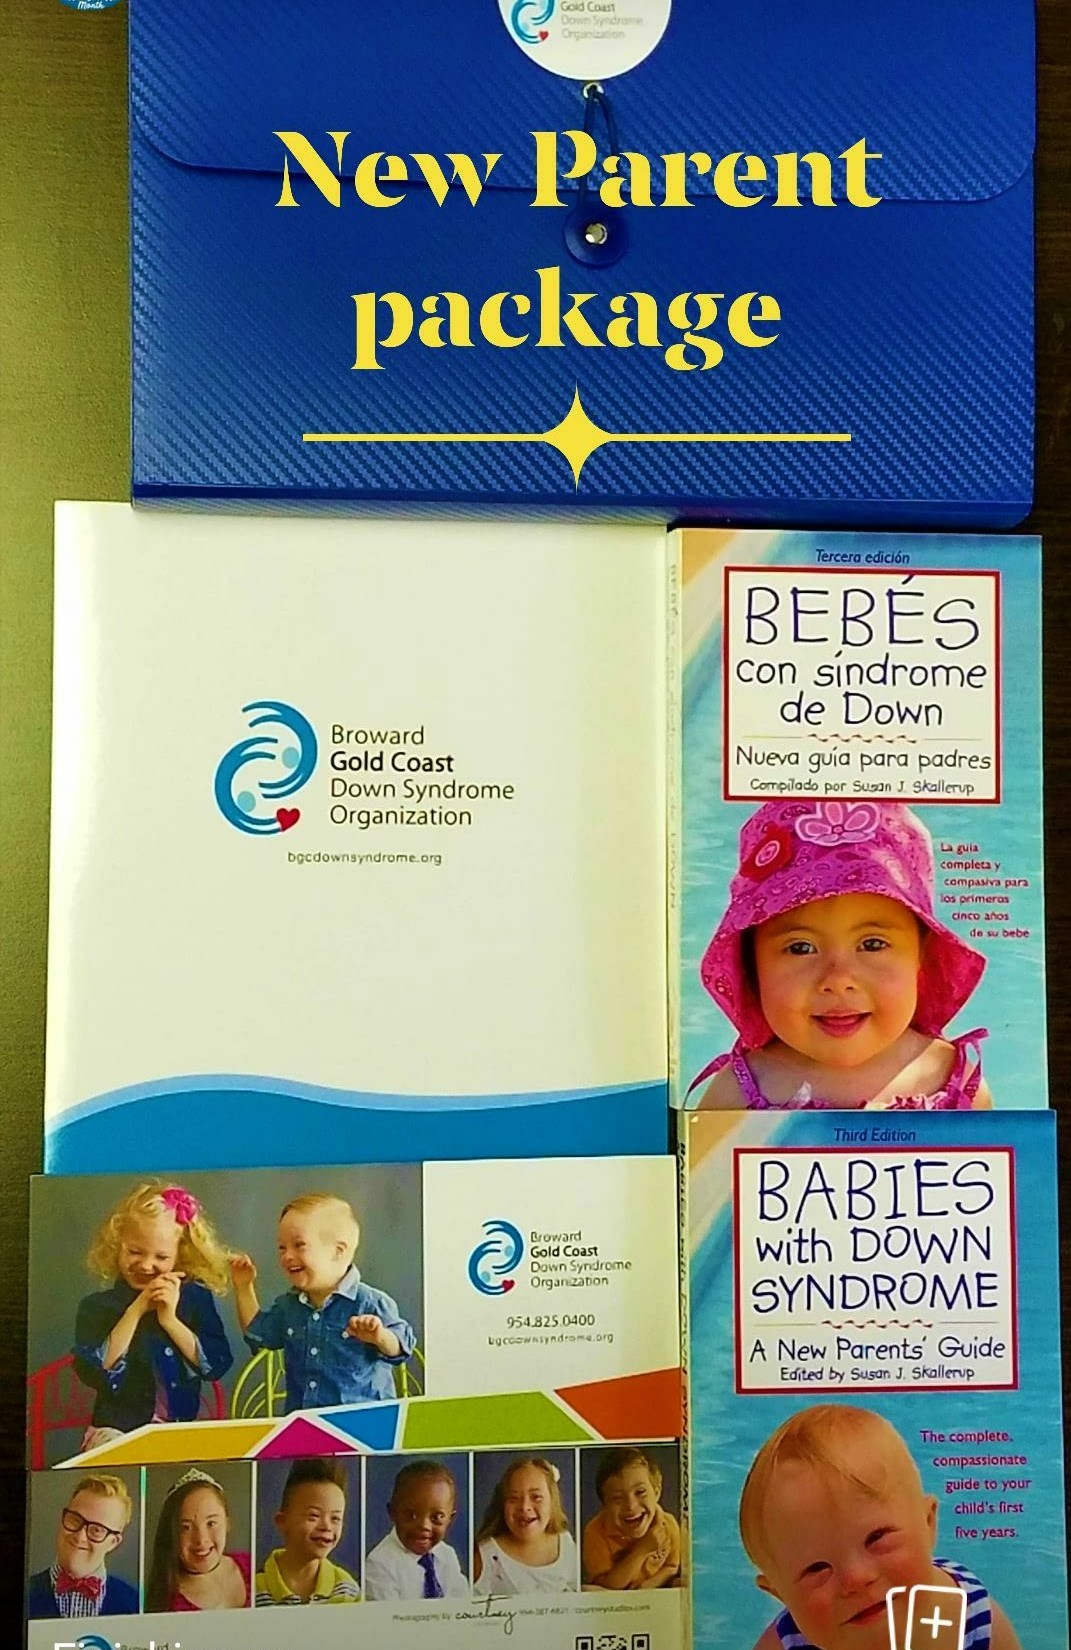 New Parent Package!